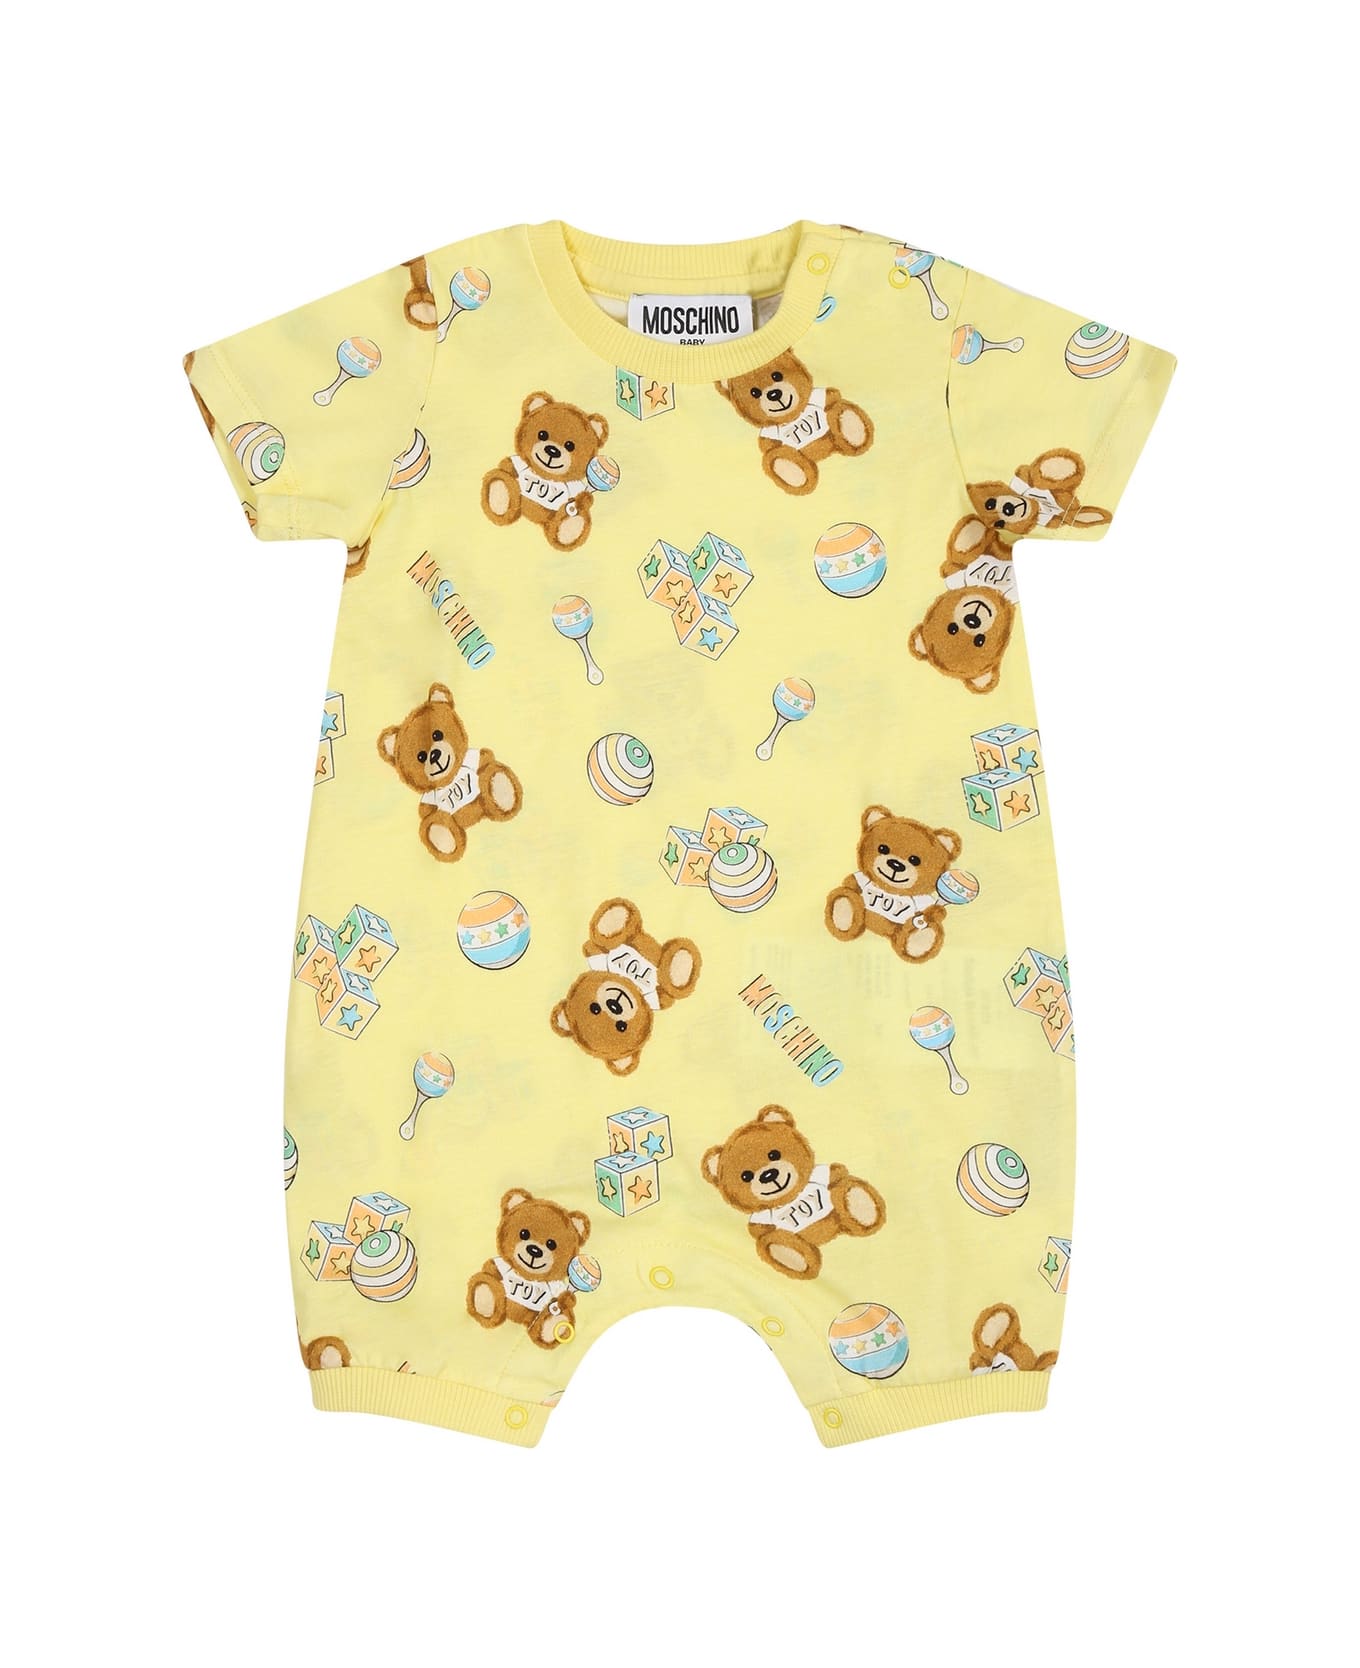 Moschino Yellow Set For Baby Kids With Teddy Bear - Yellow